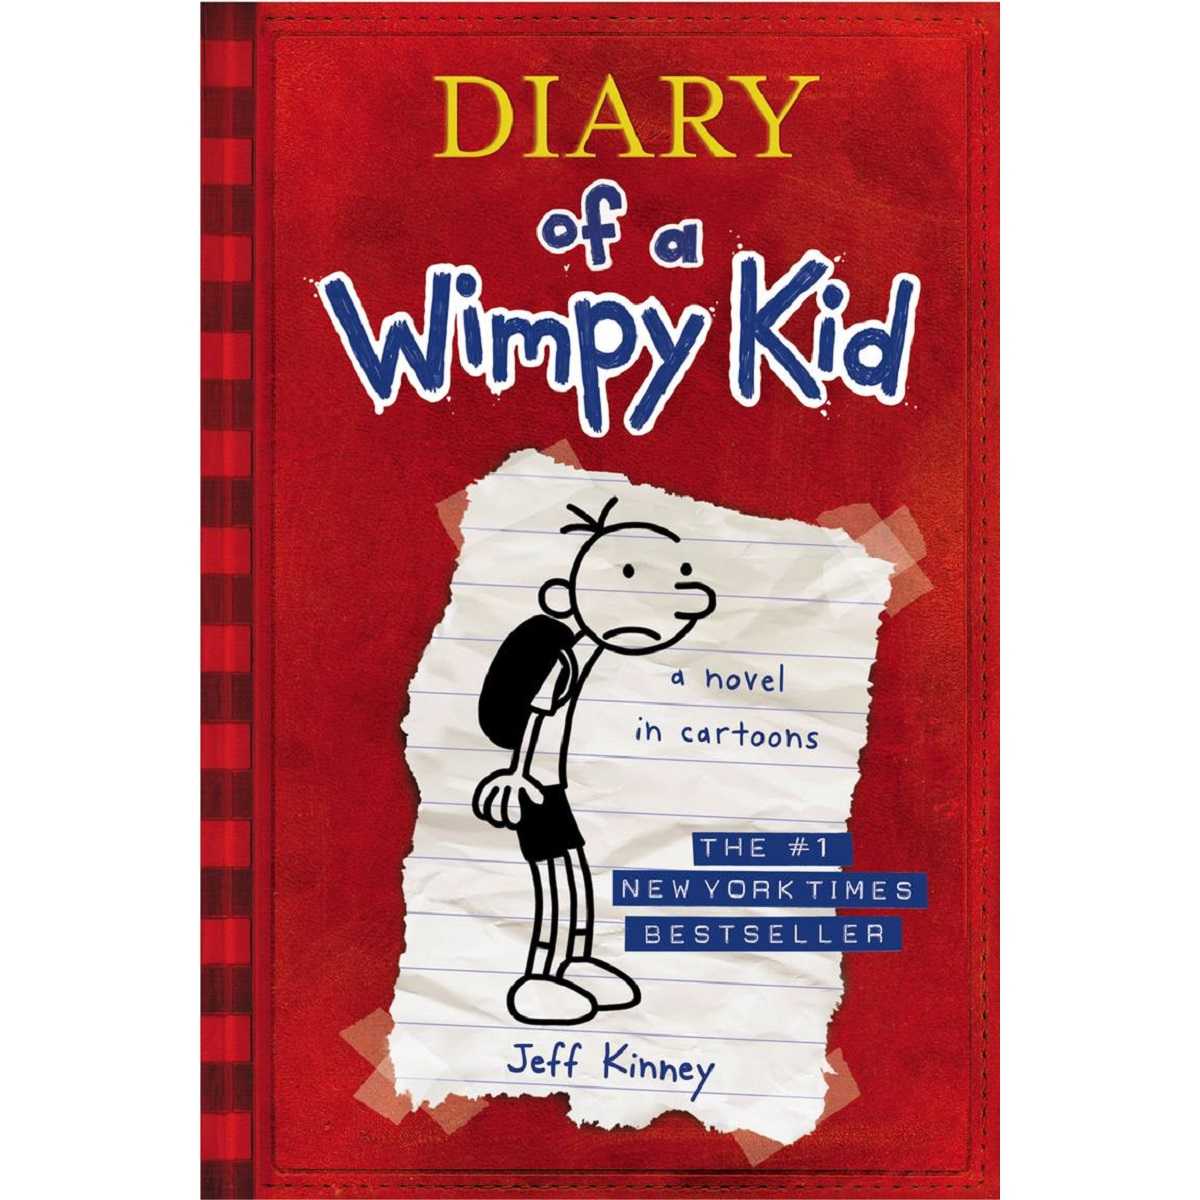 Diary of a Wimpy Kid: A Novel in Cartoons By Jeff Kinney